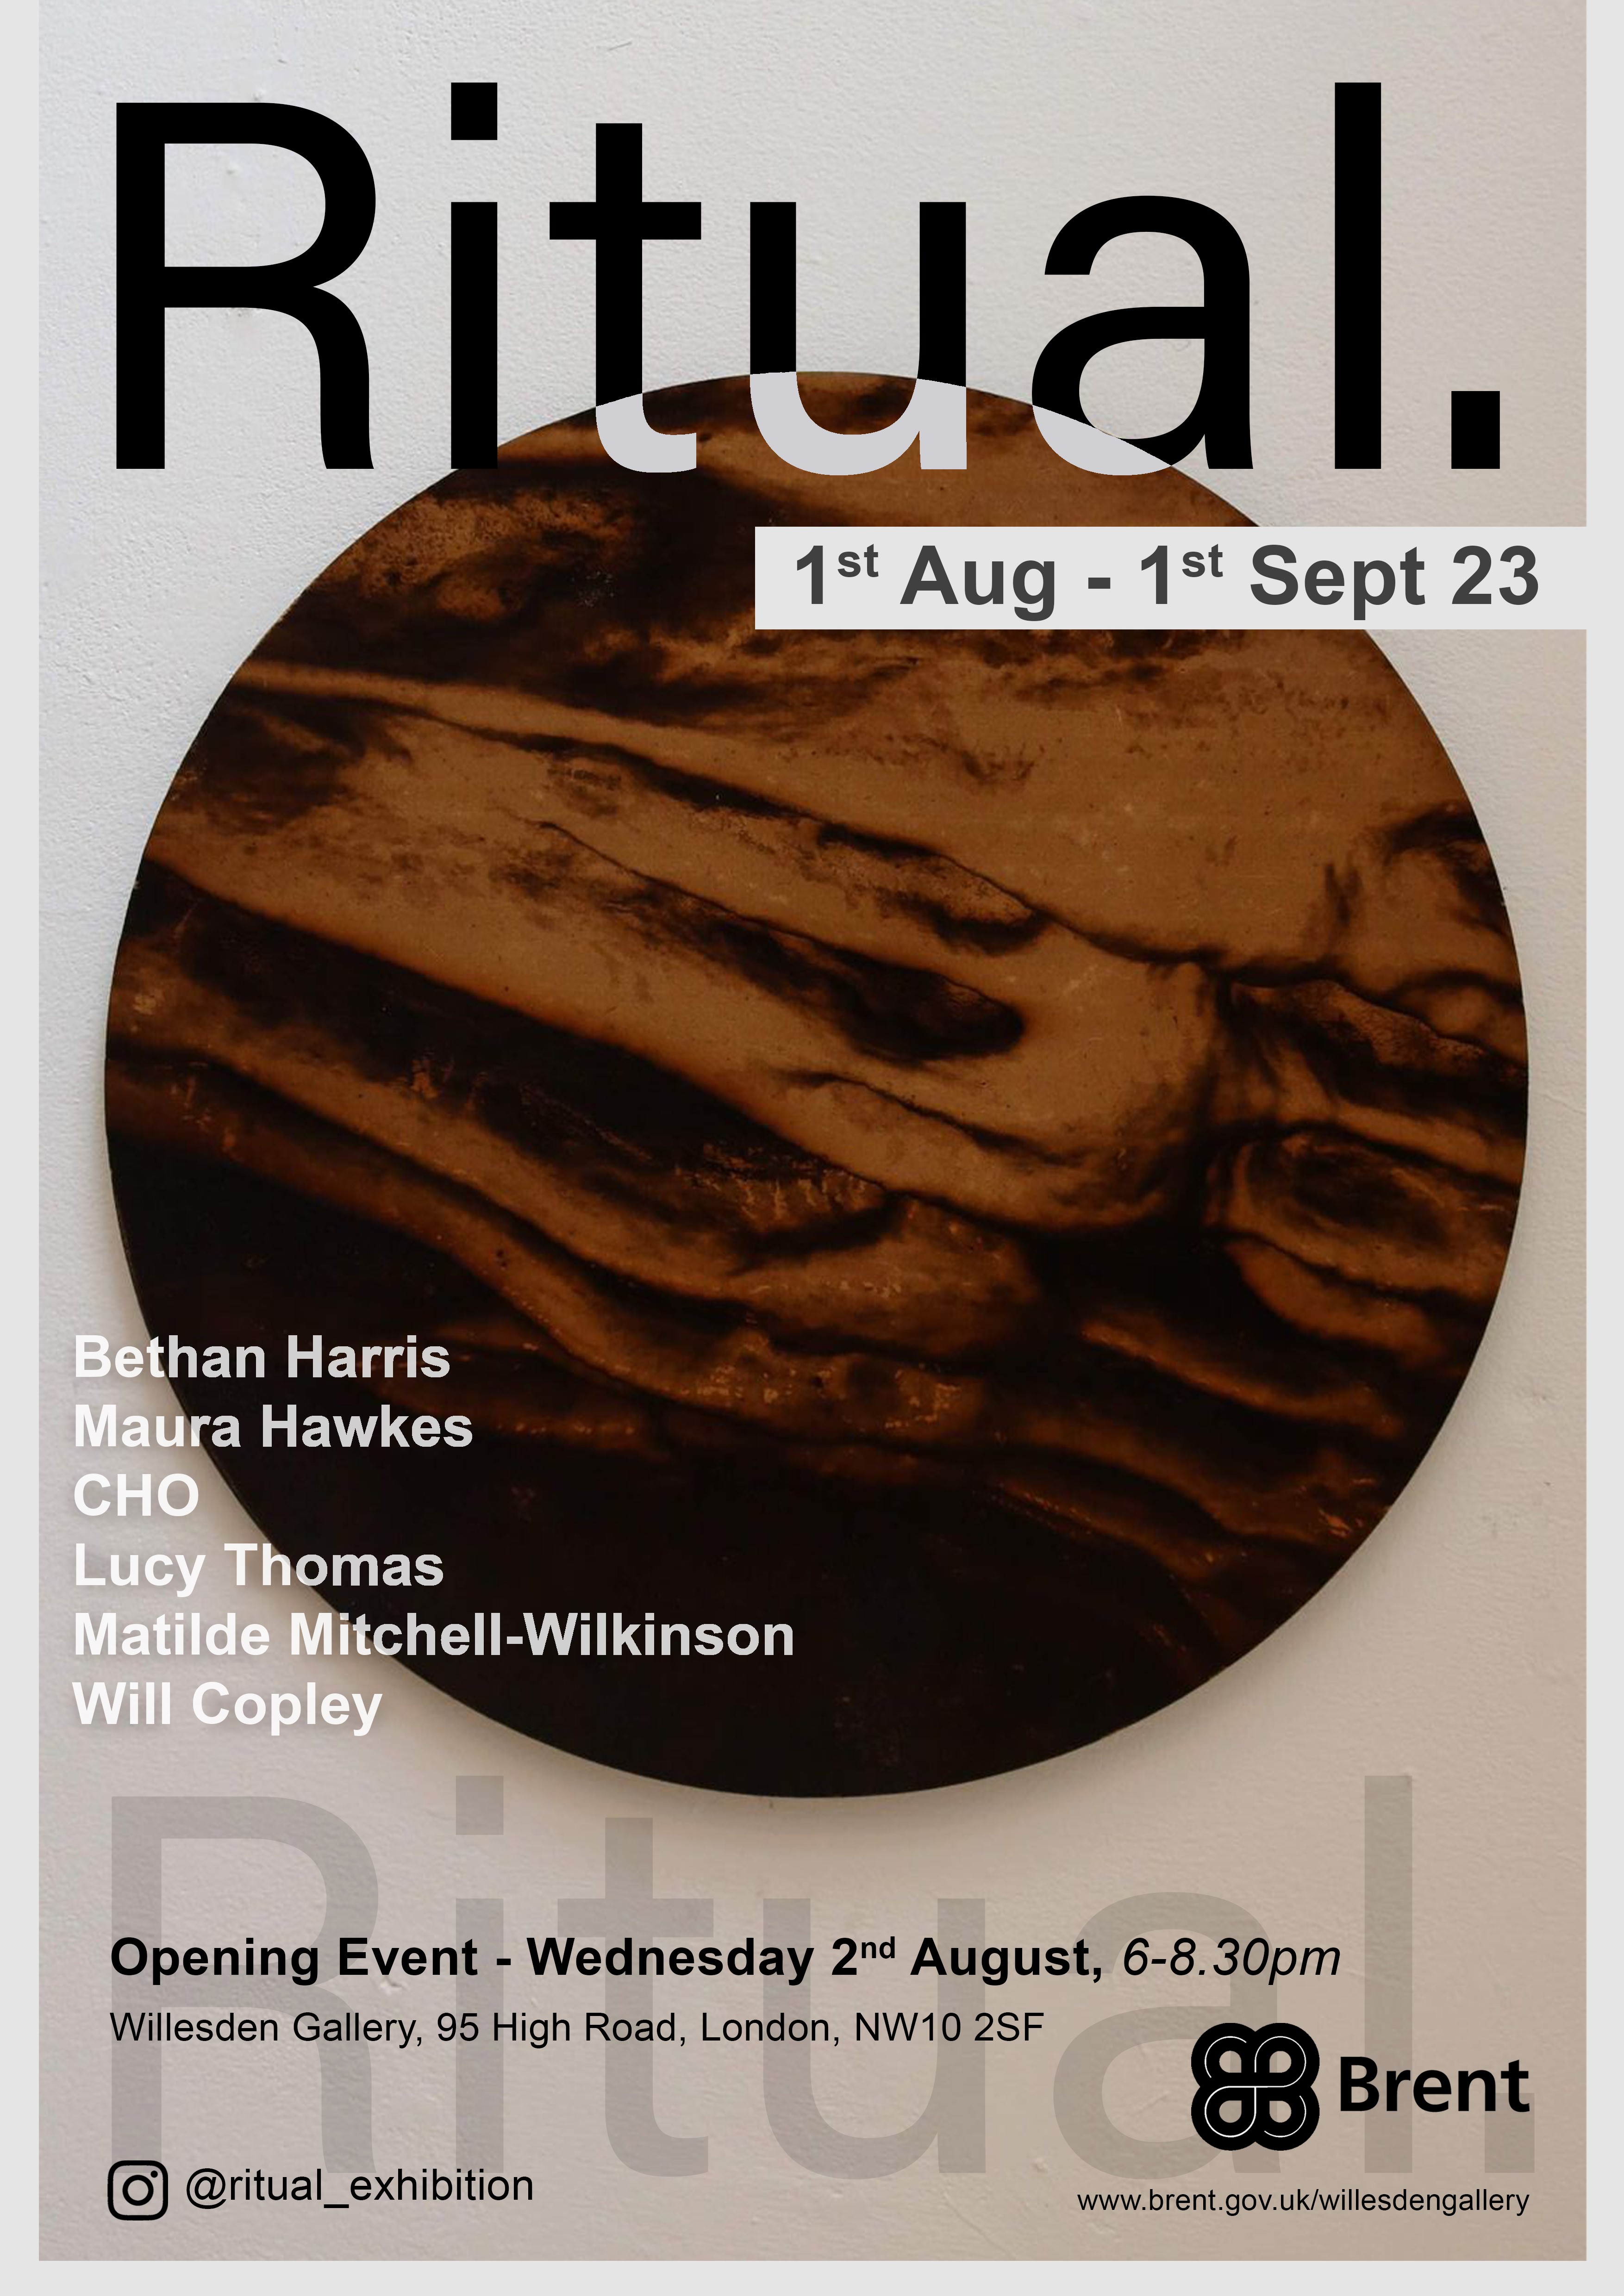 poster for exhibition called 'RITUAL'